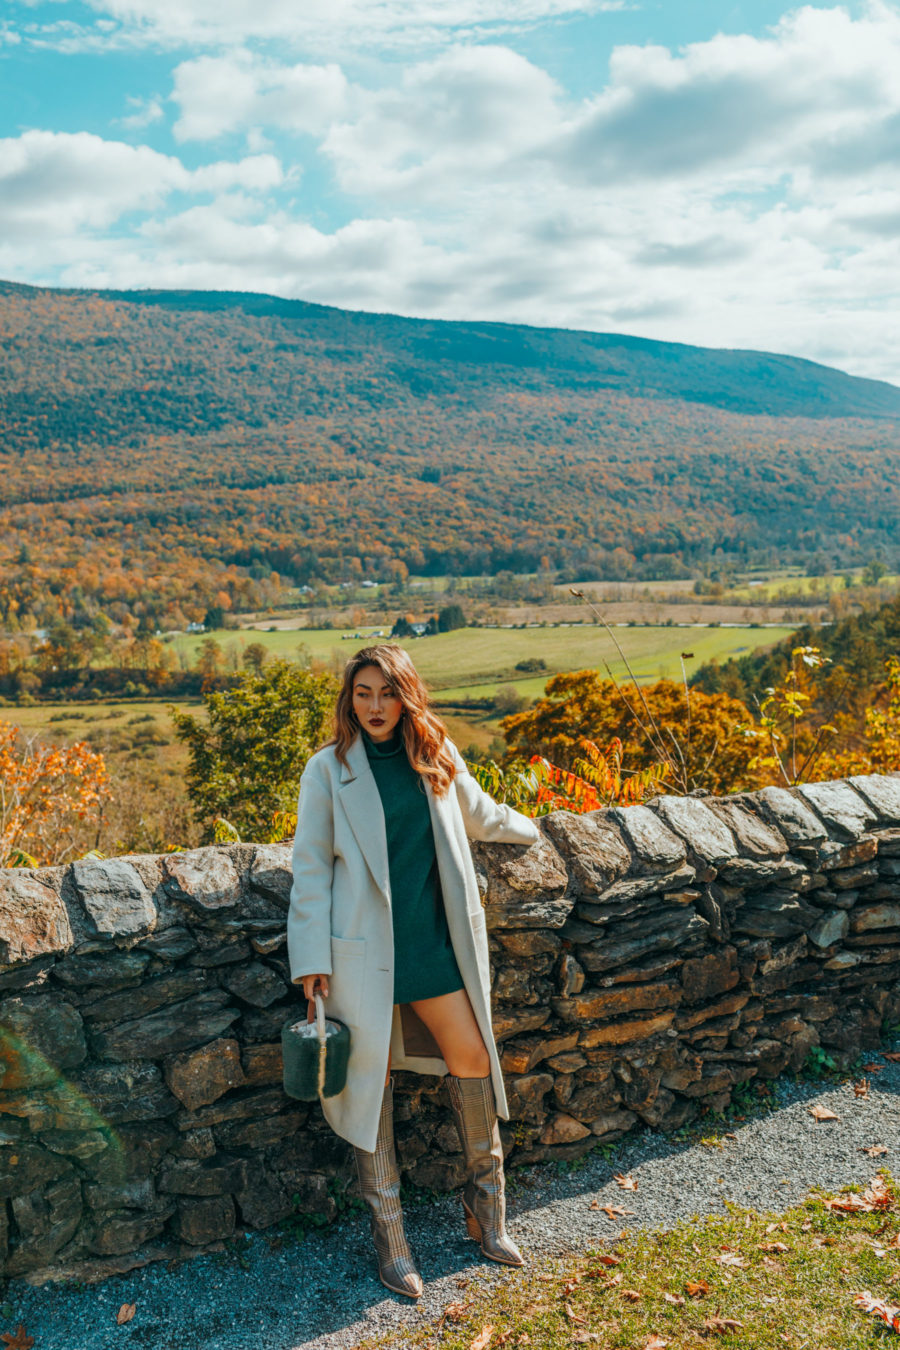 fun fall activities with the family in vermont // Jessica Wang - Notjessfashion.com